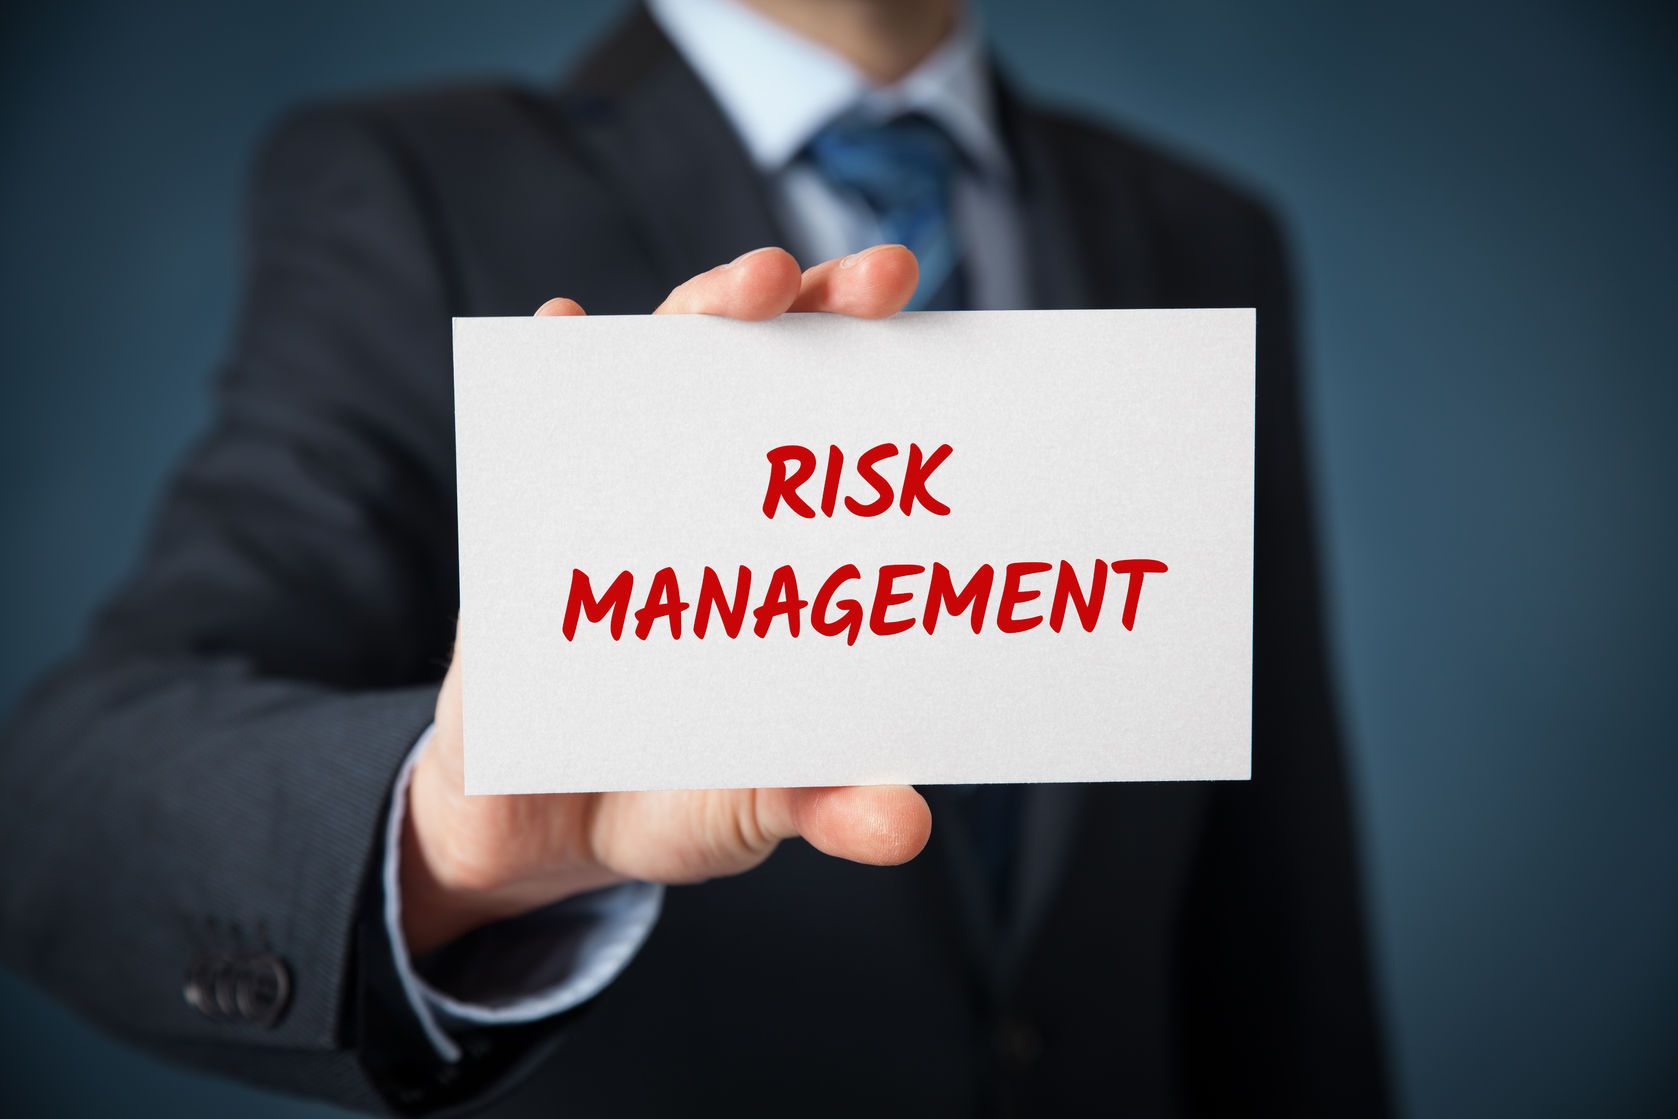 Person holding sign that says Risk Management